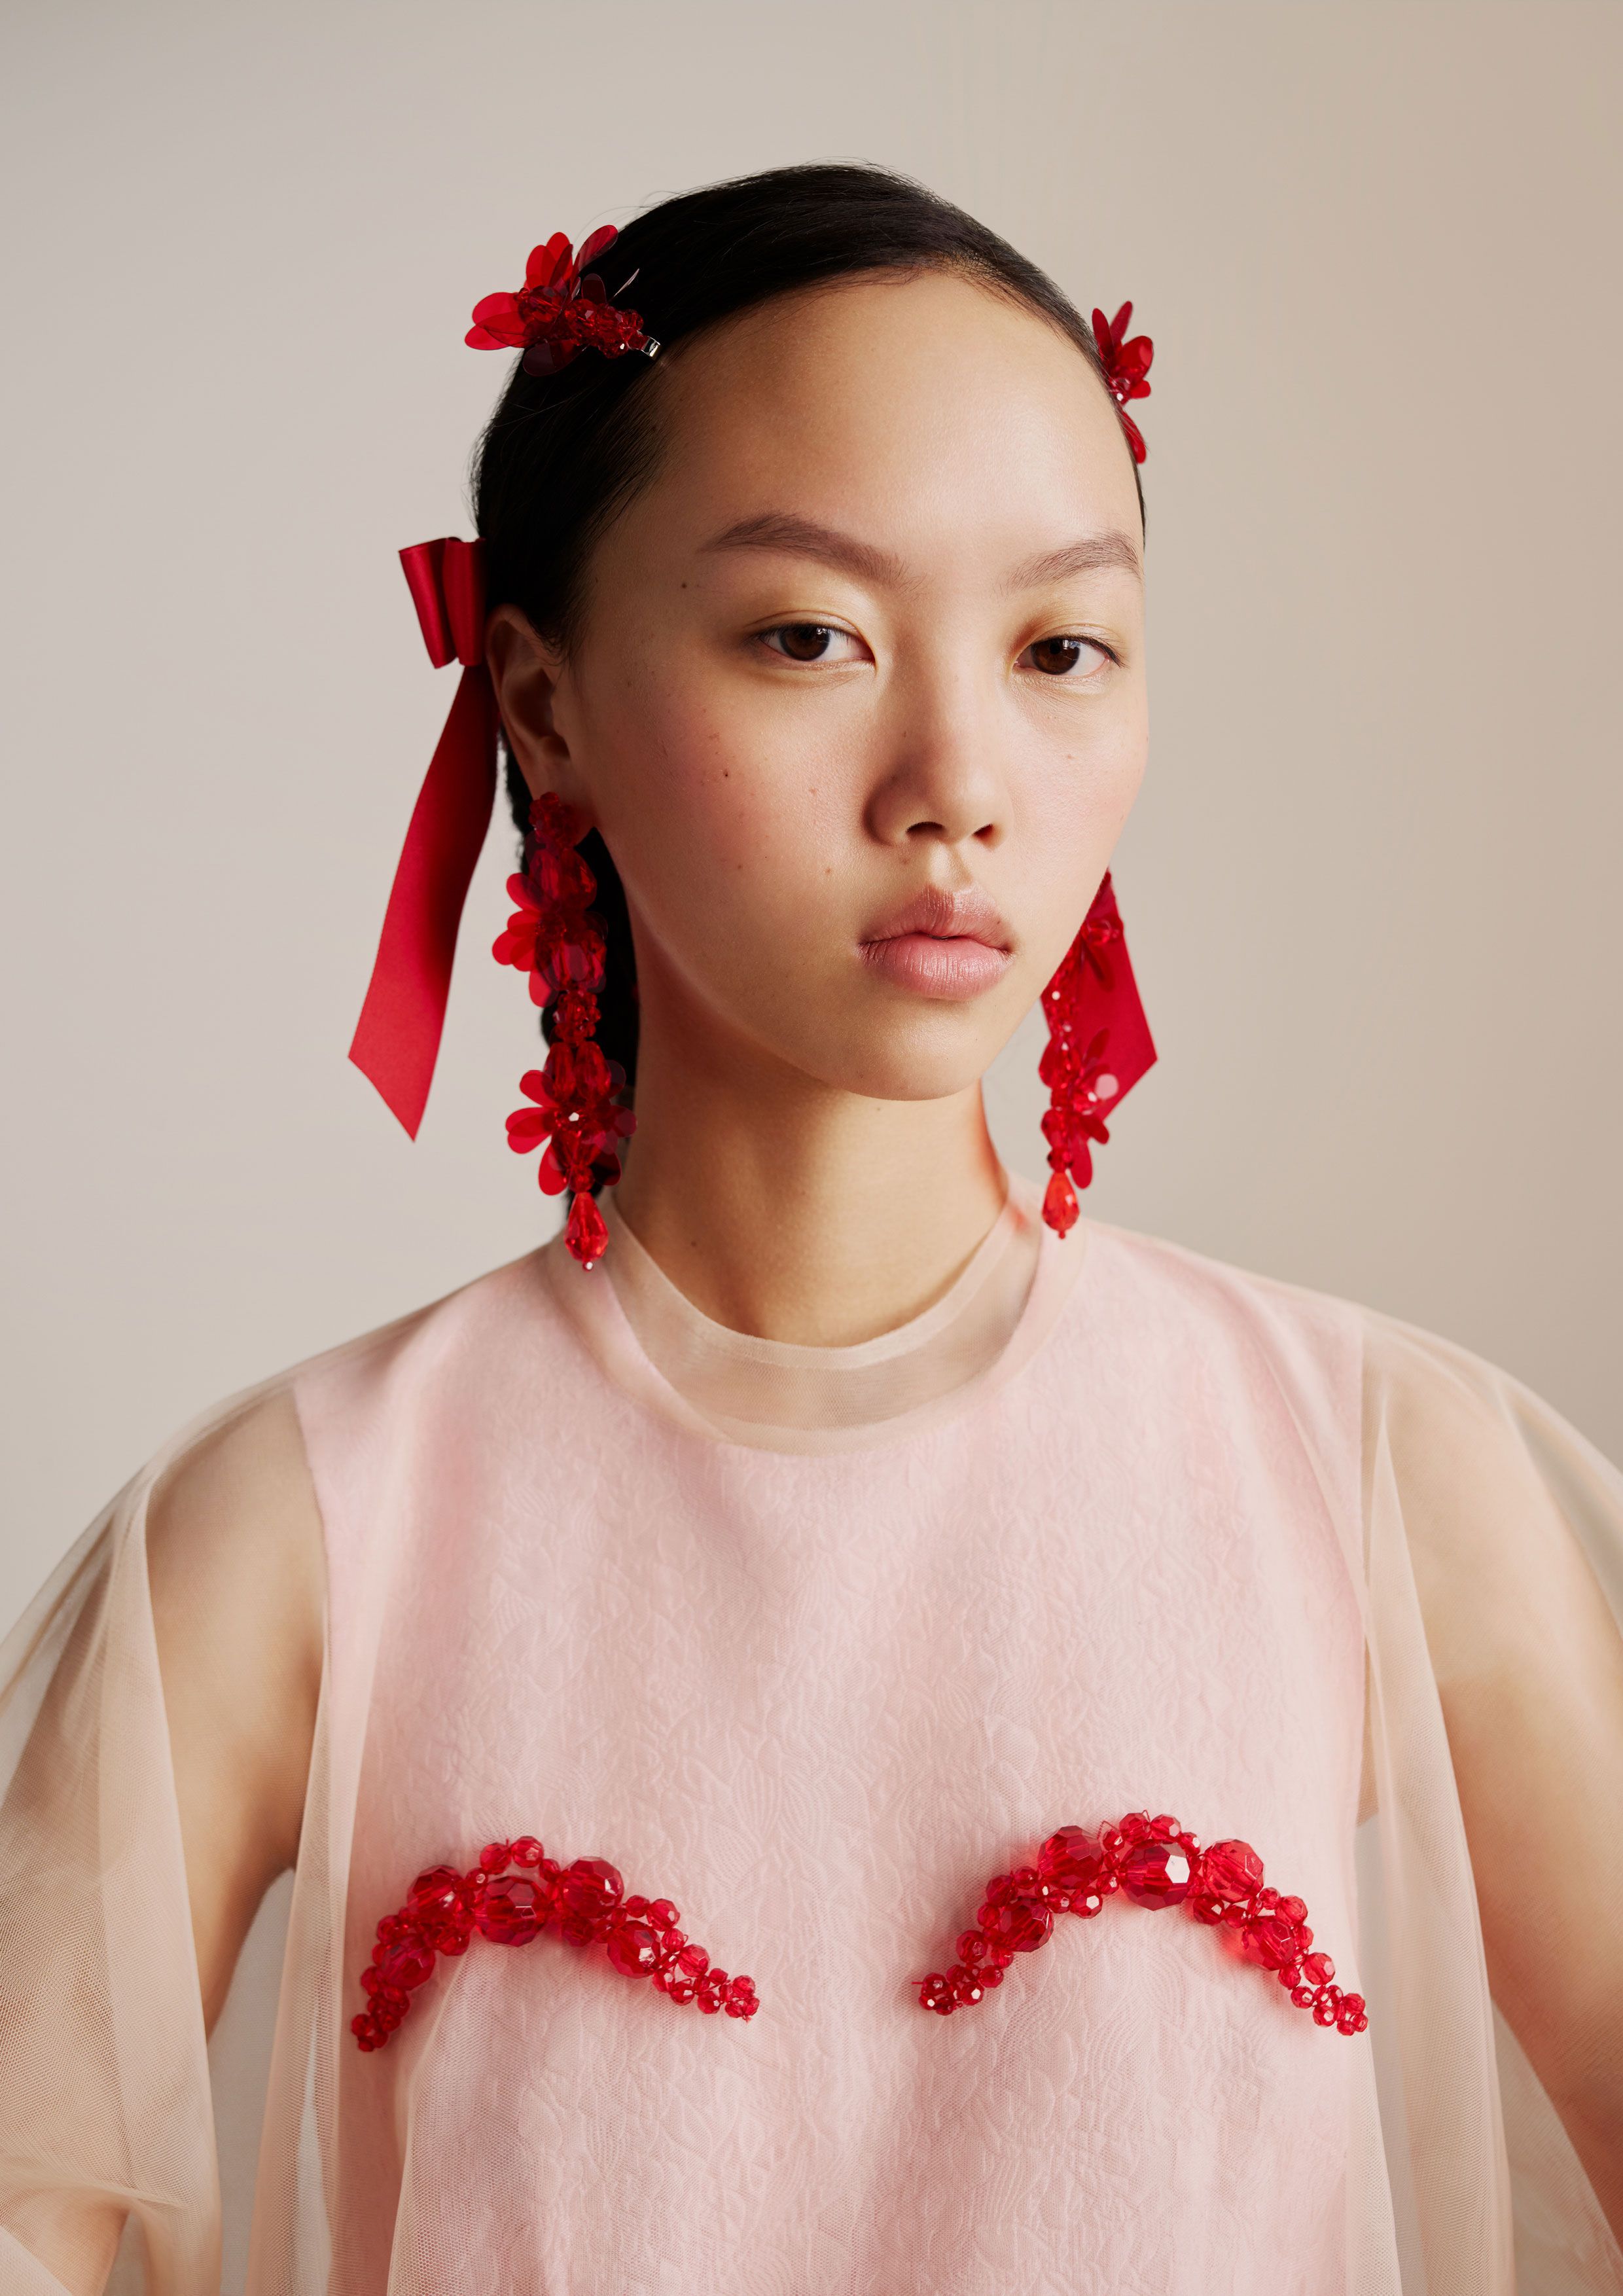 The Simone Rocha x H&M Collaboration is Out Today